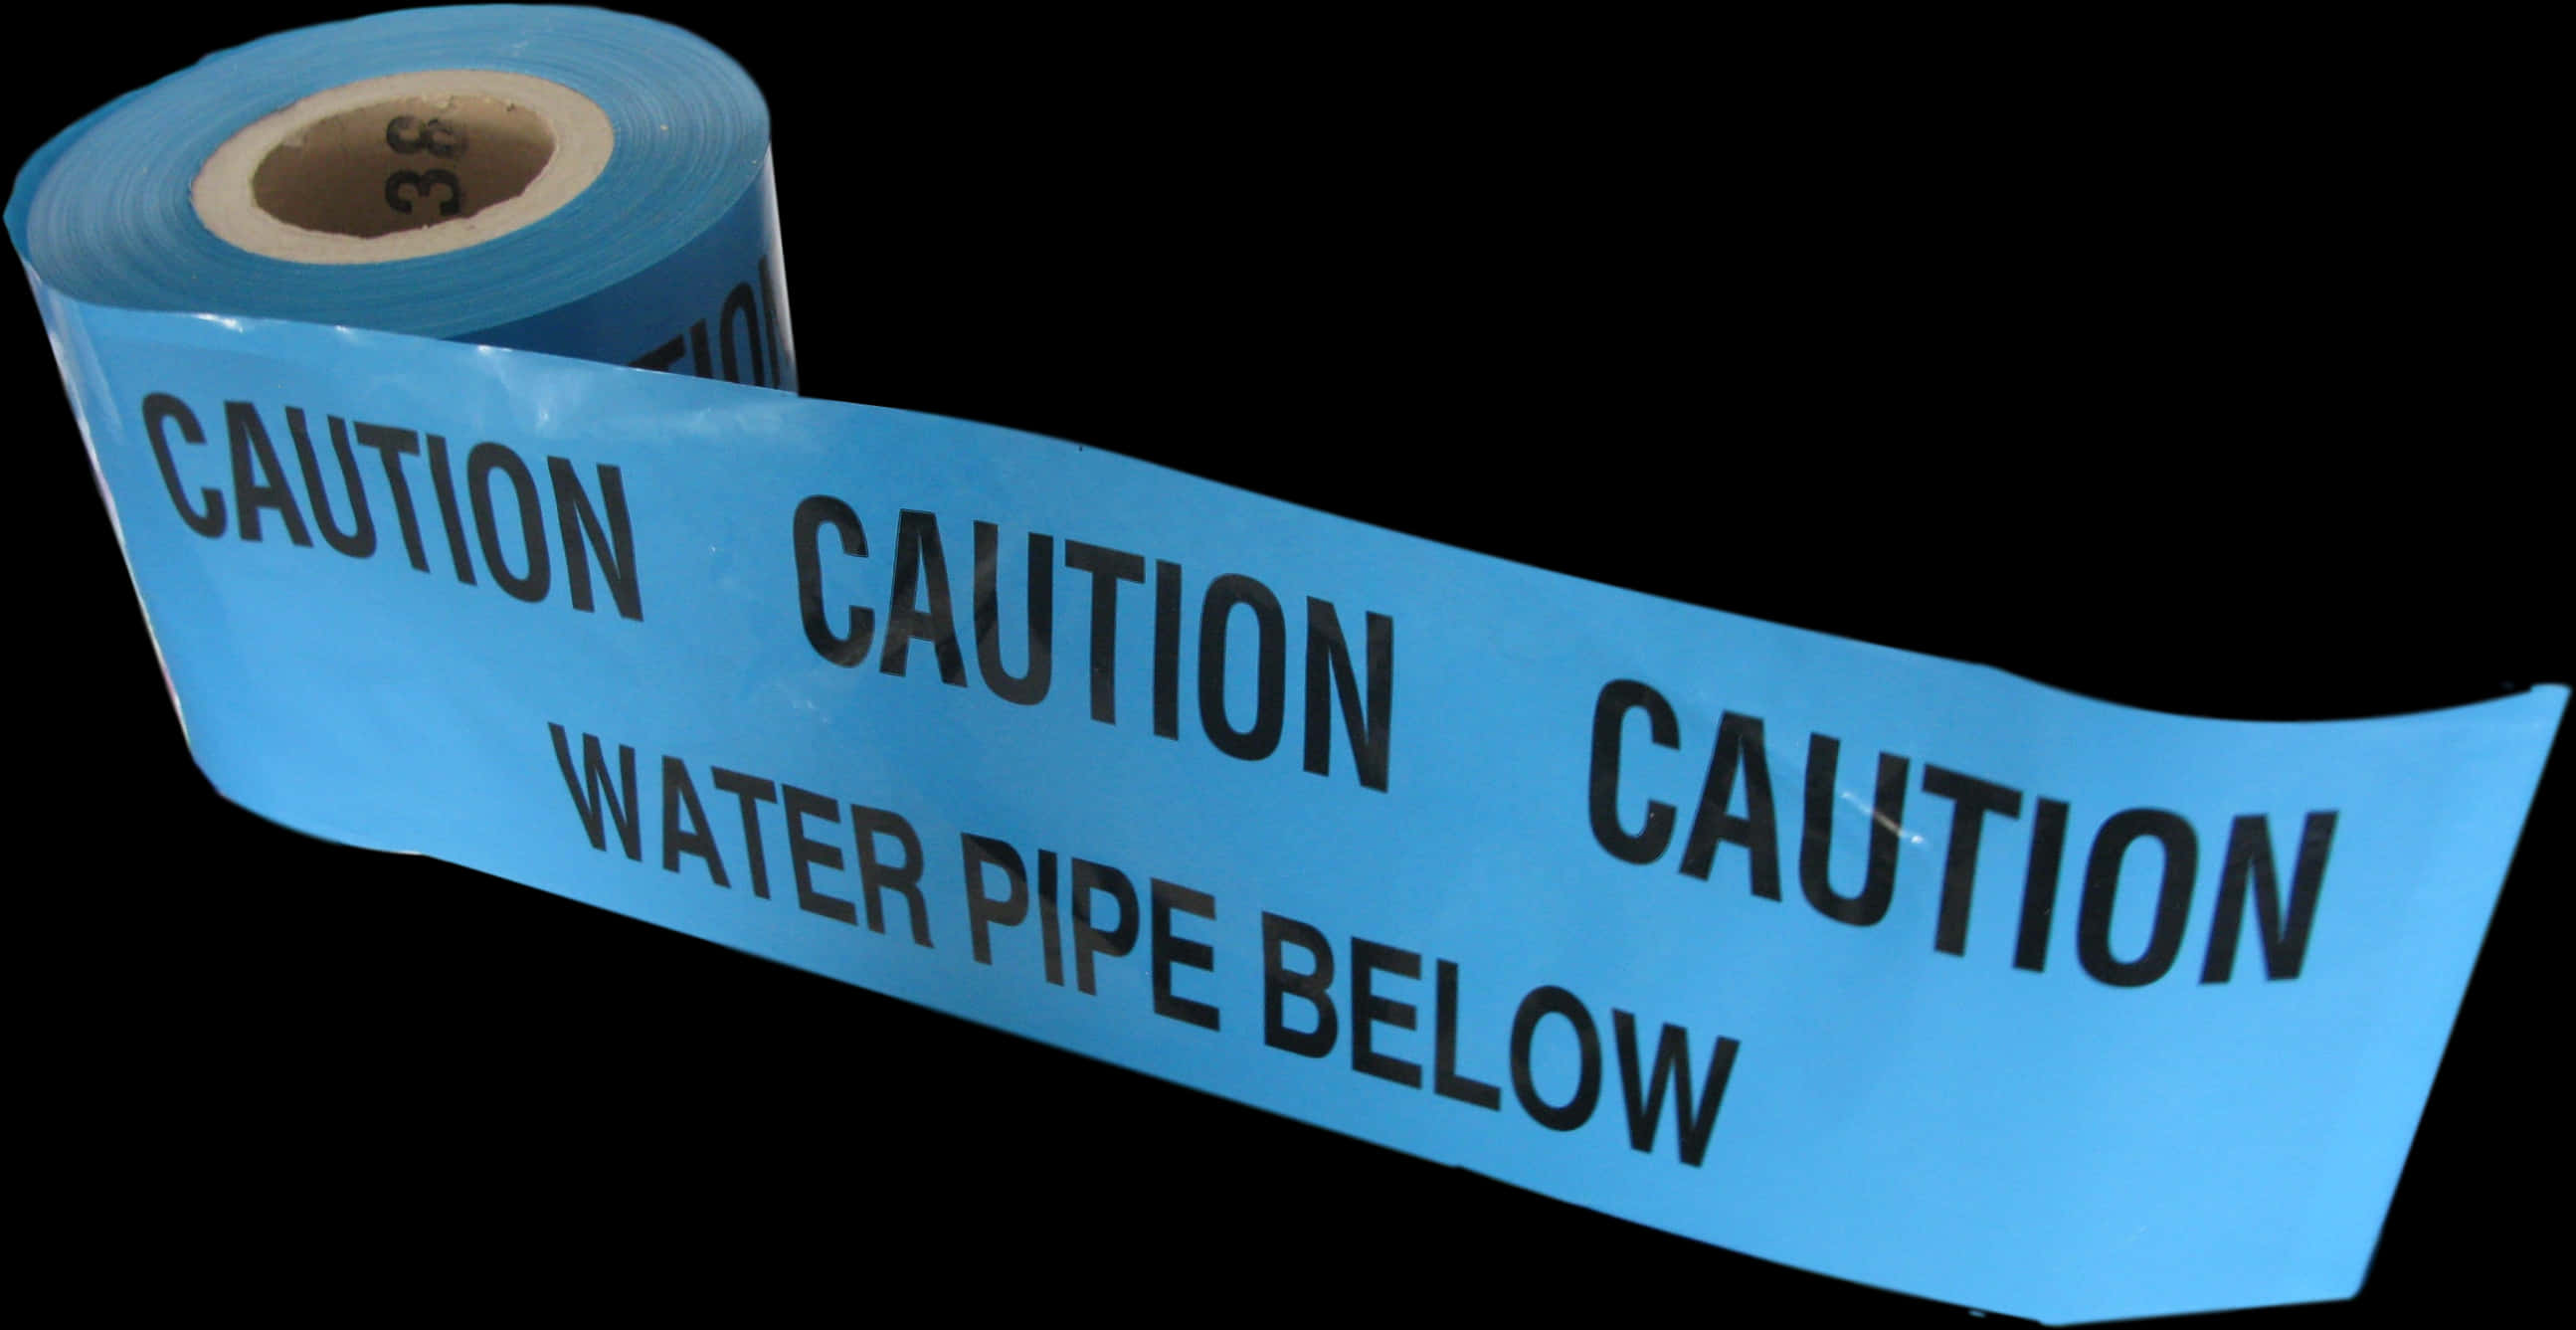 Blue Caution Water Pipe Below Tape